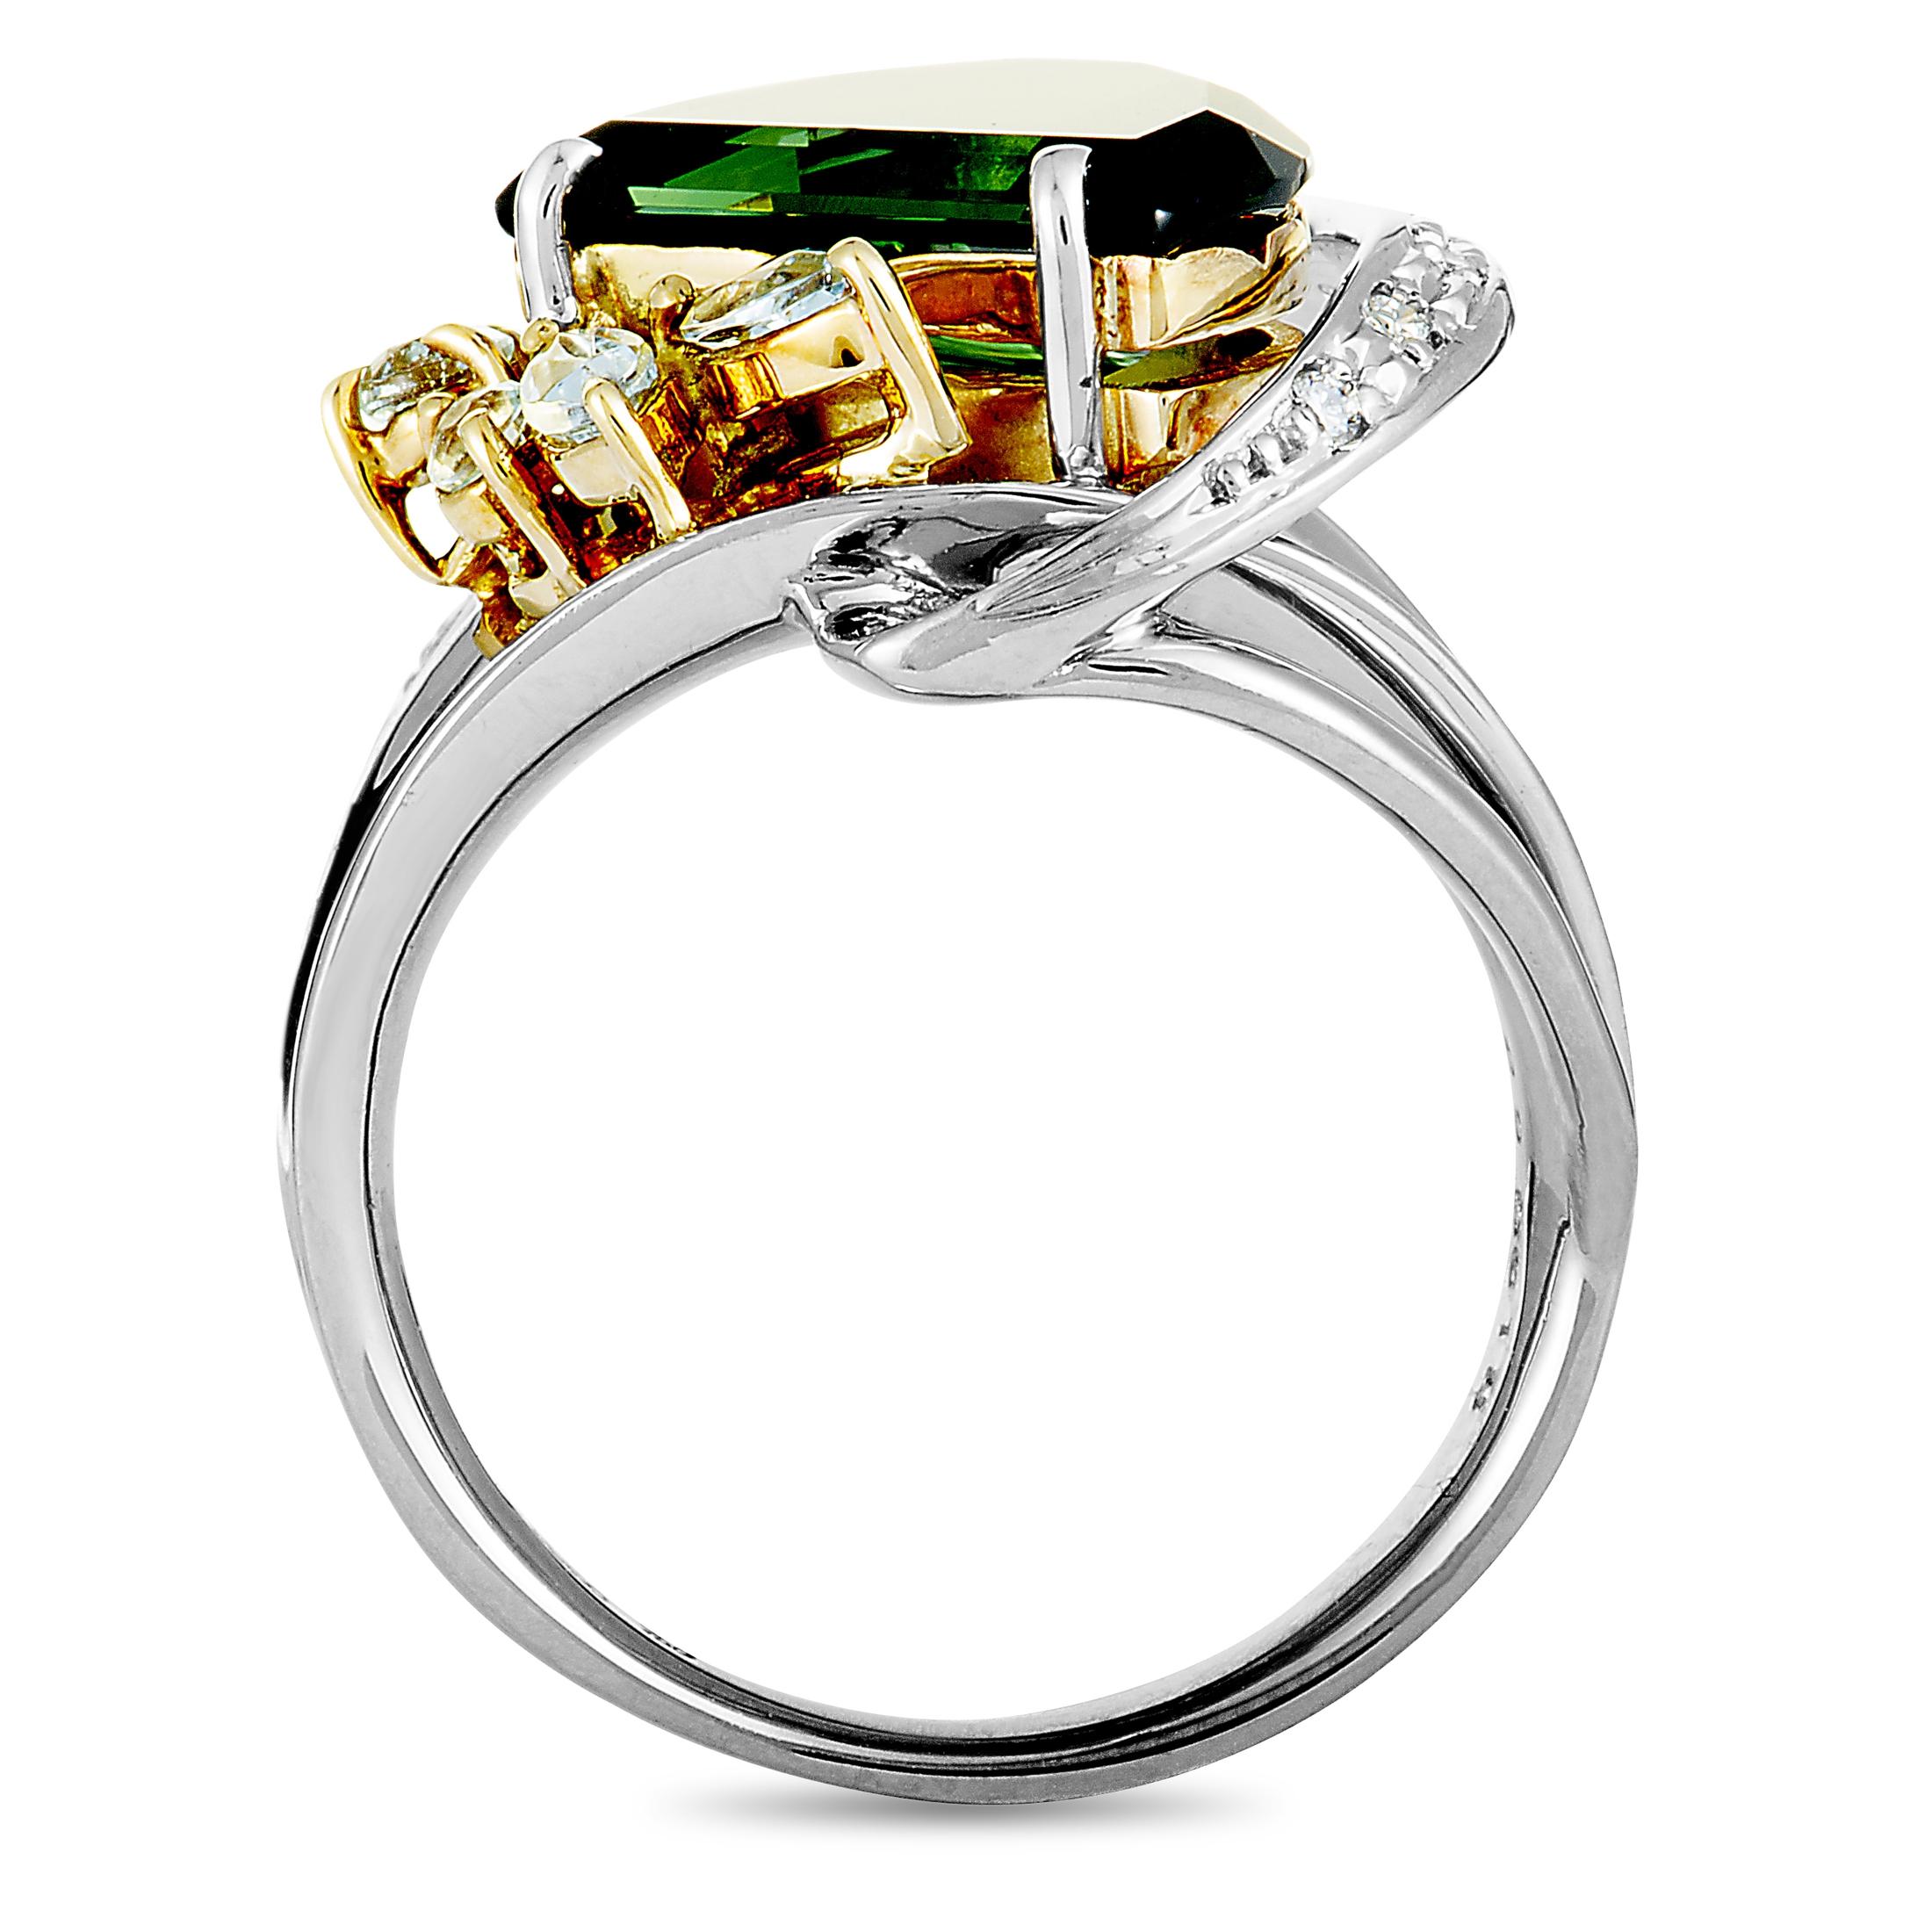 Fashionably crafted from the prestigious glisten of platinum and shimmering 18K yellow gold, this stunning ring is an artistic wonder! The beautiful is embellished with 0.18 carats of gorgeous diamonds and a sensational green tourmaline, weighing